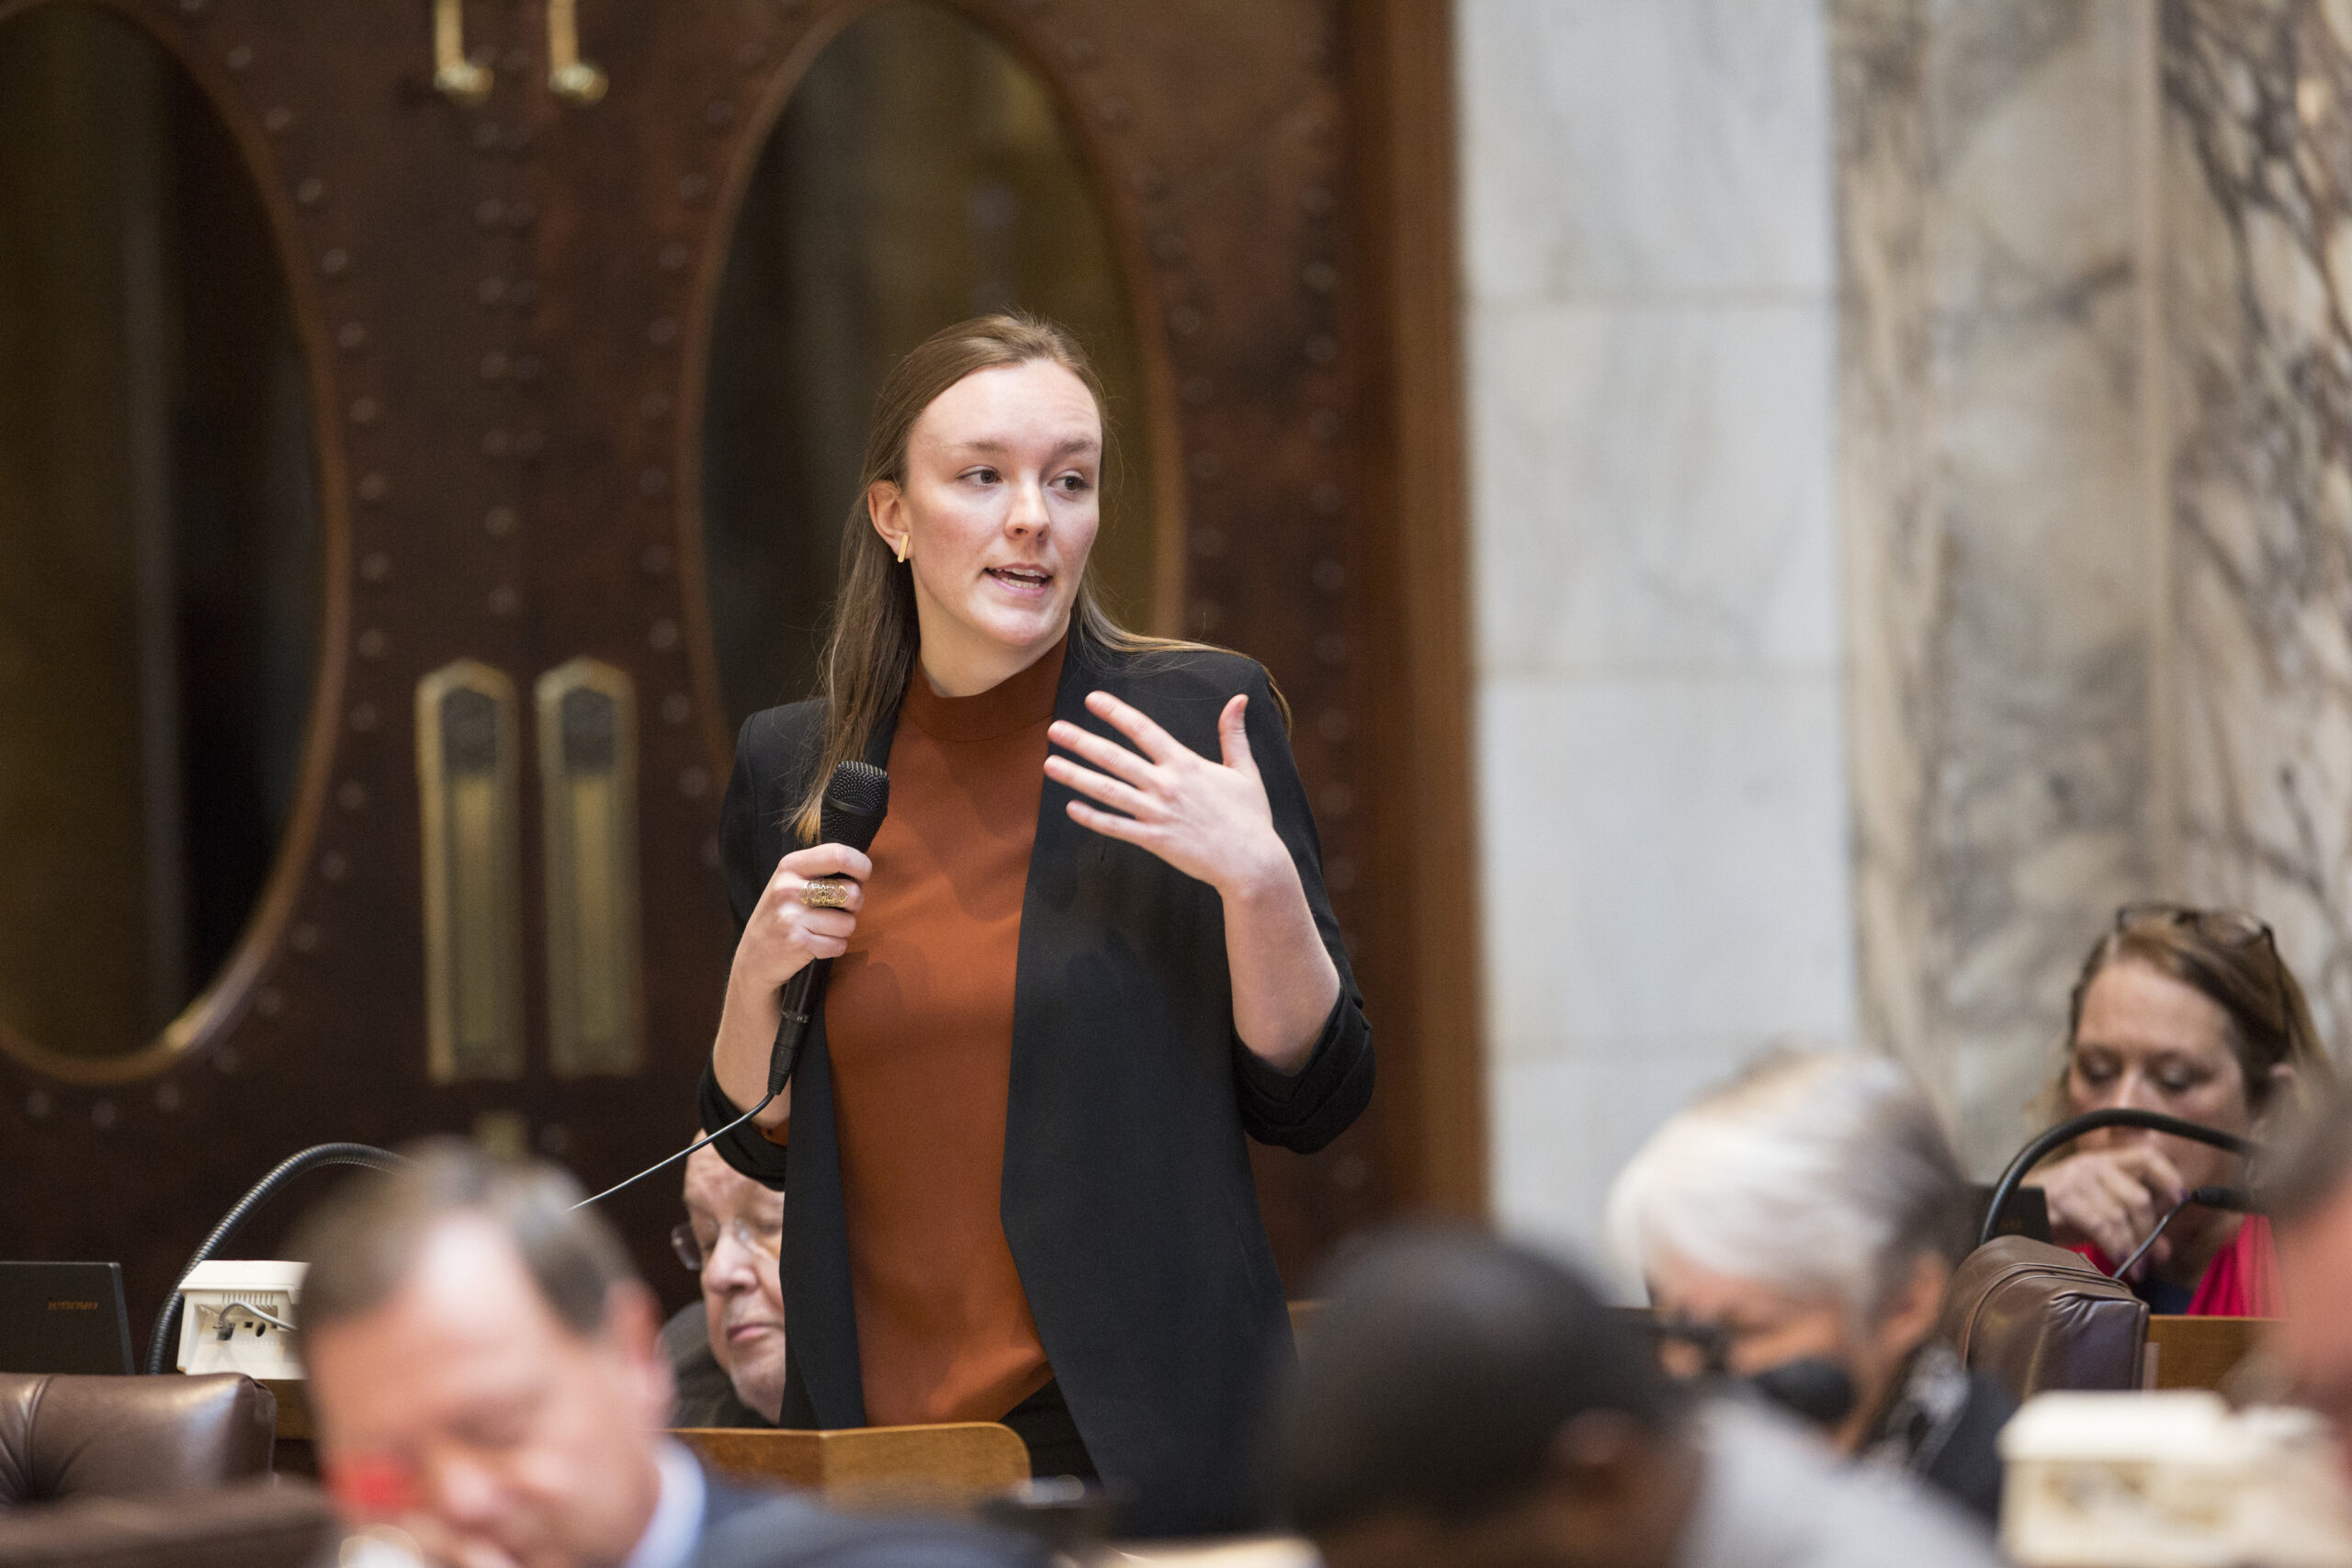 Rep. Greta Neubauer addresses her colleagues in the State Assembly